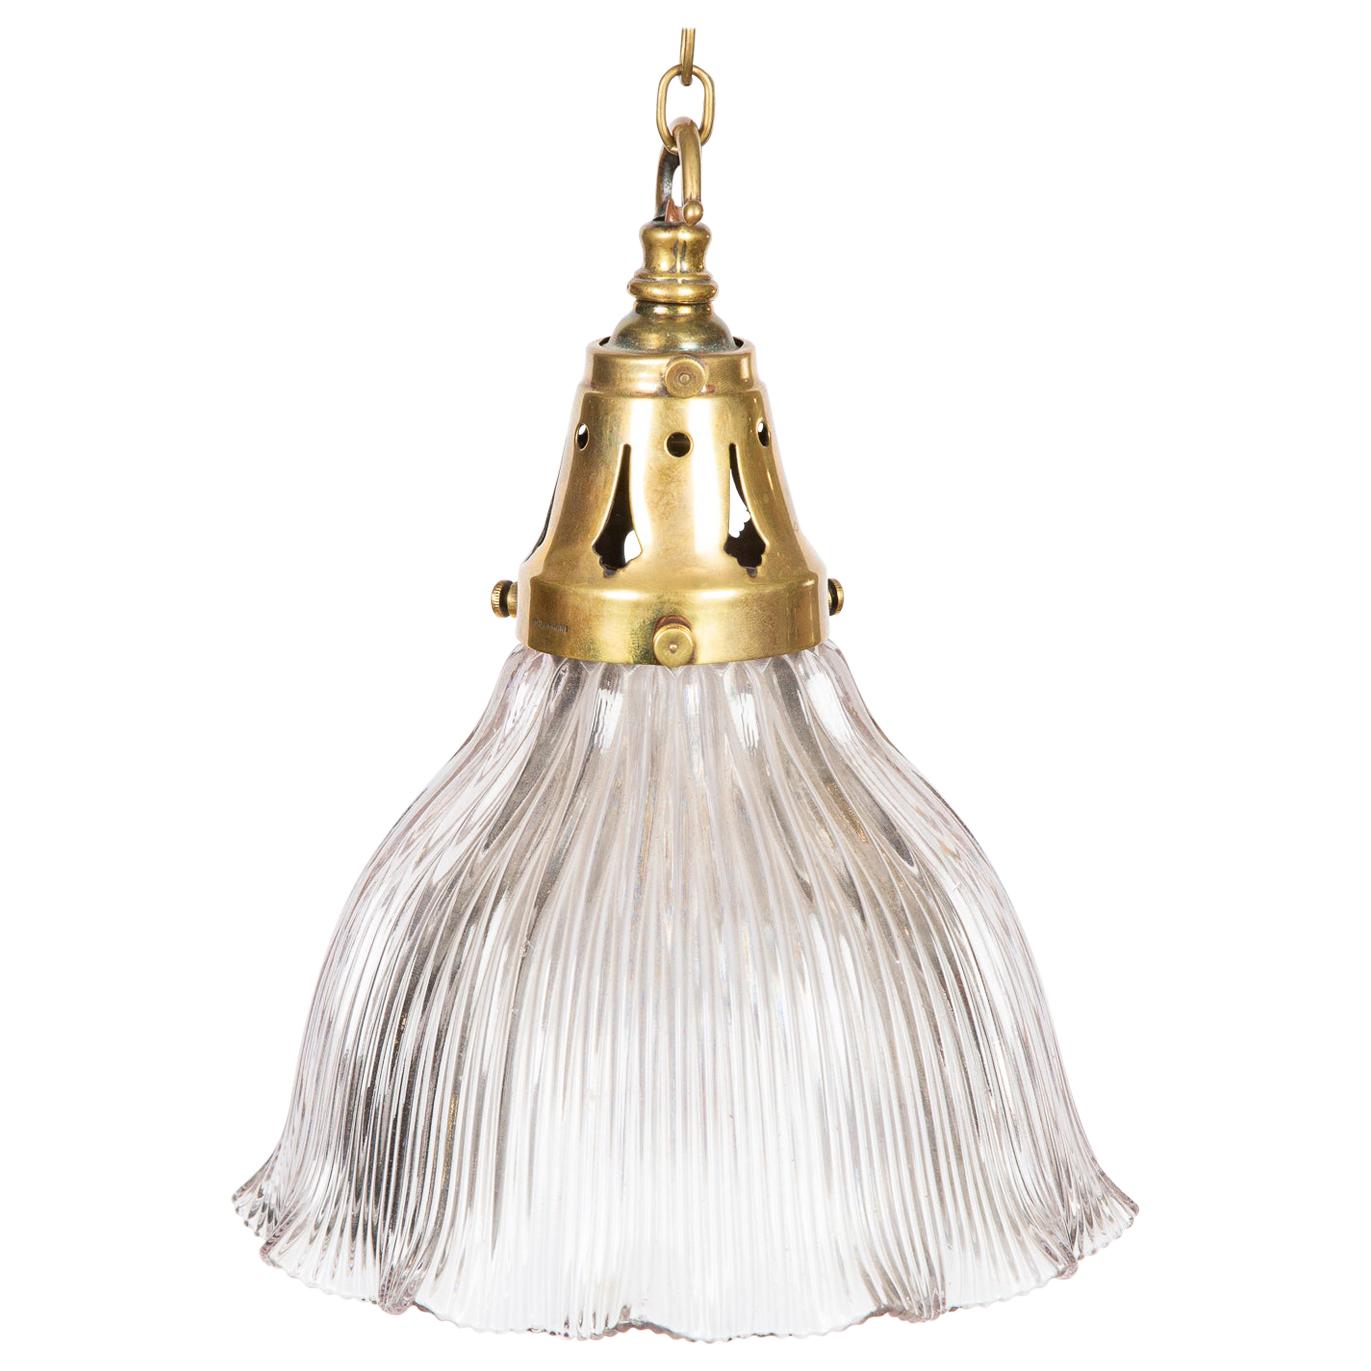 Fluted Glass Hanging Light by Holophane